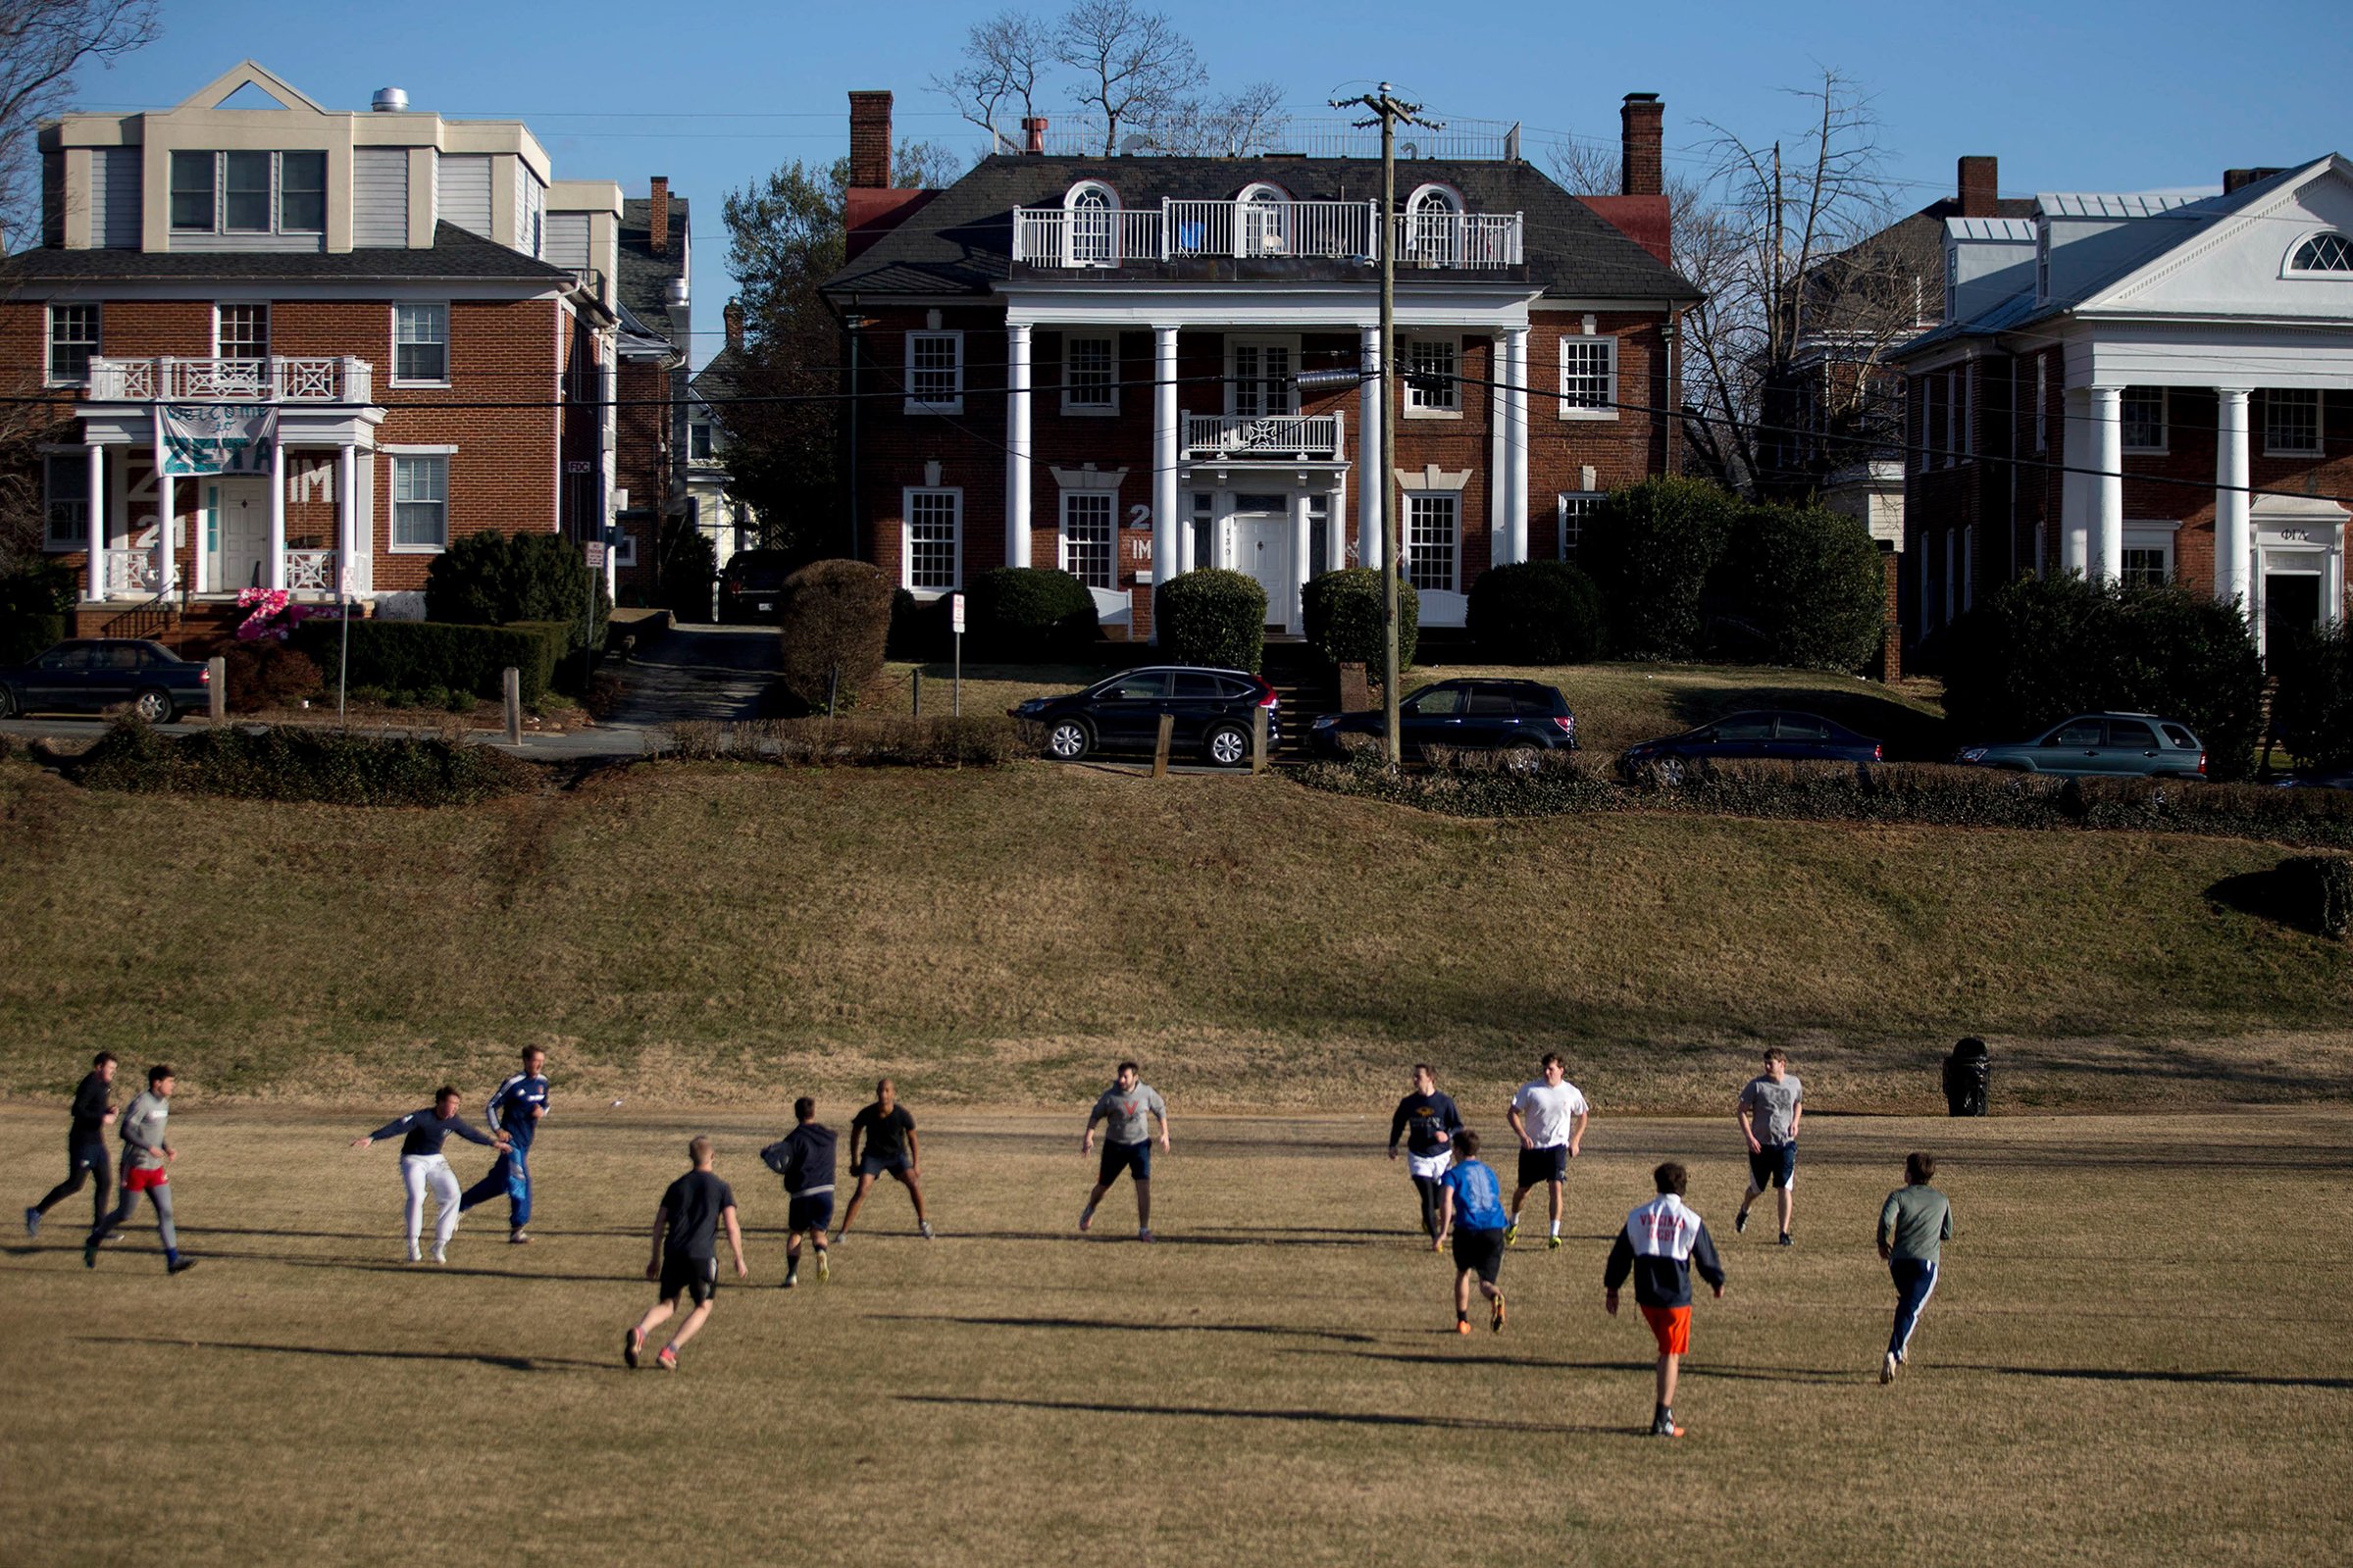 Students play rugby on the Madison Bowl field of the University of Virginia (UVA) campus next to fraternity houses on Madison Lane in Charlottesville, Virginia, Jan. 16, 2015.